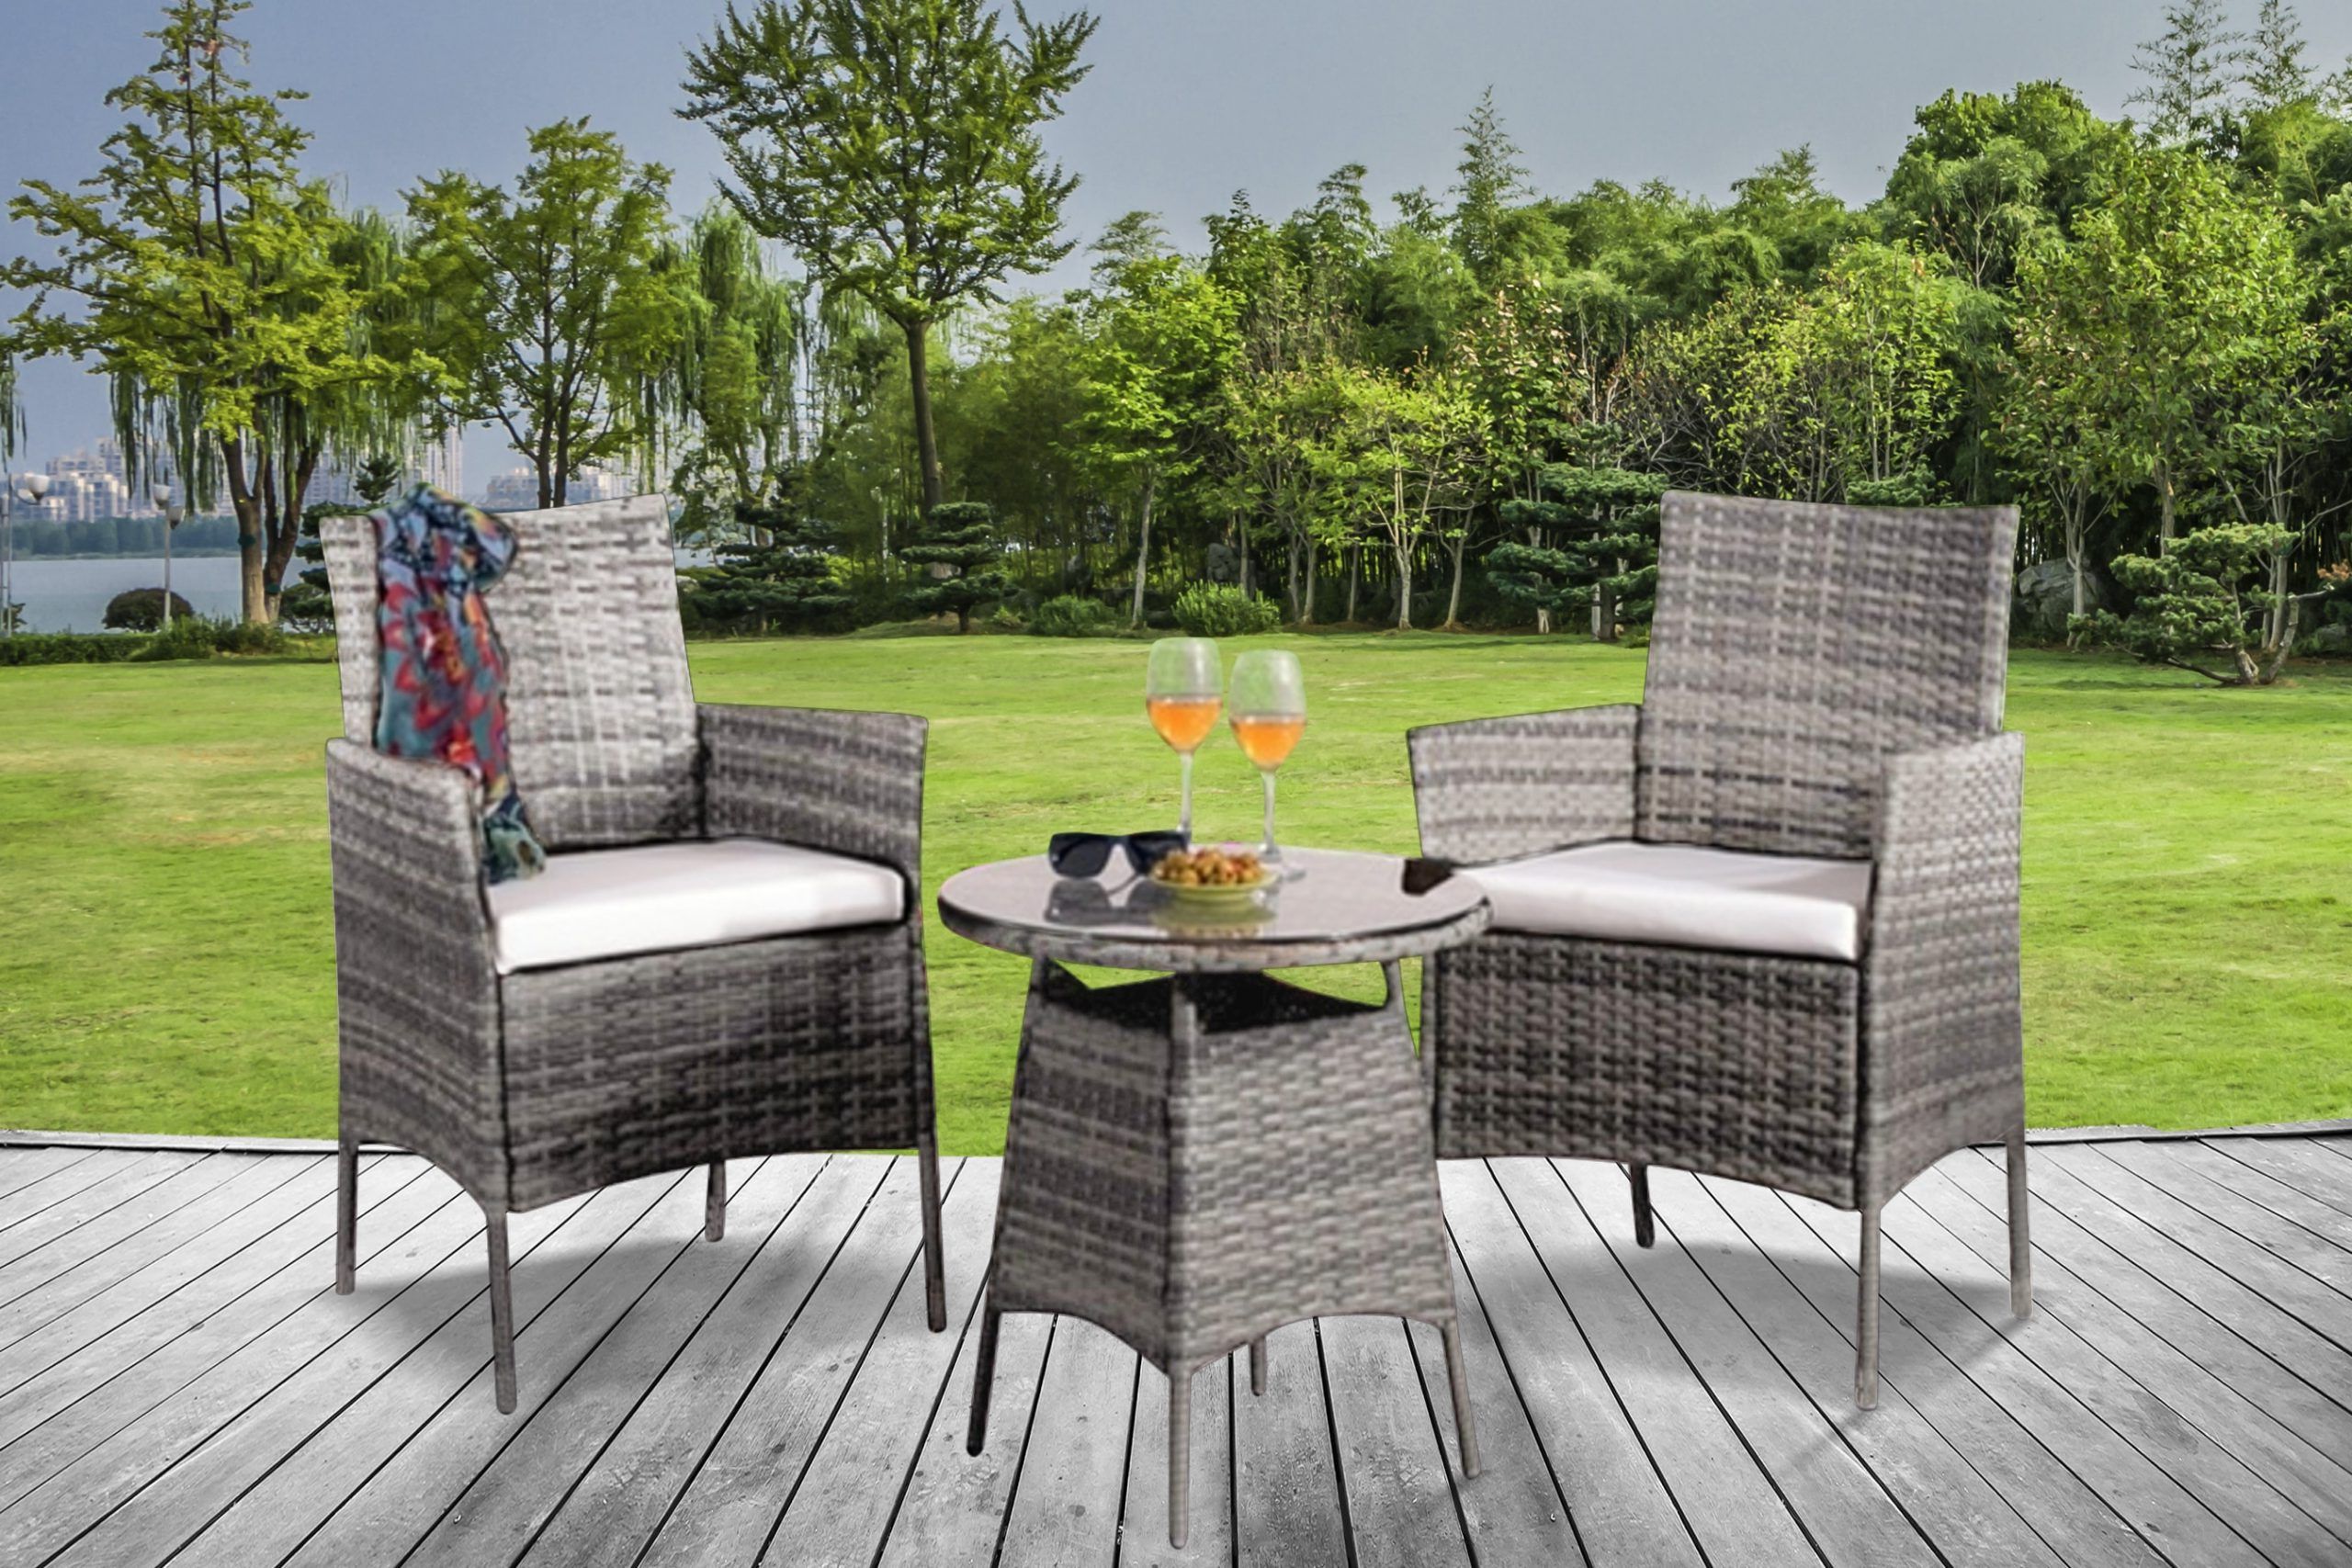 Natural All Weather Outdoor Seating Patio Sets Intended For Latest Two Seater Value Patio Set (View 2 of 15)